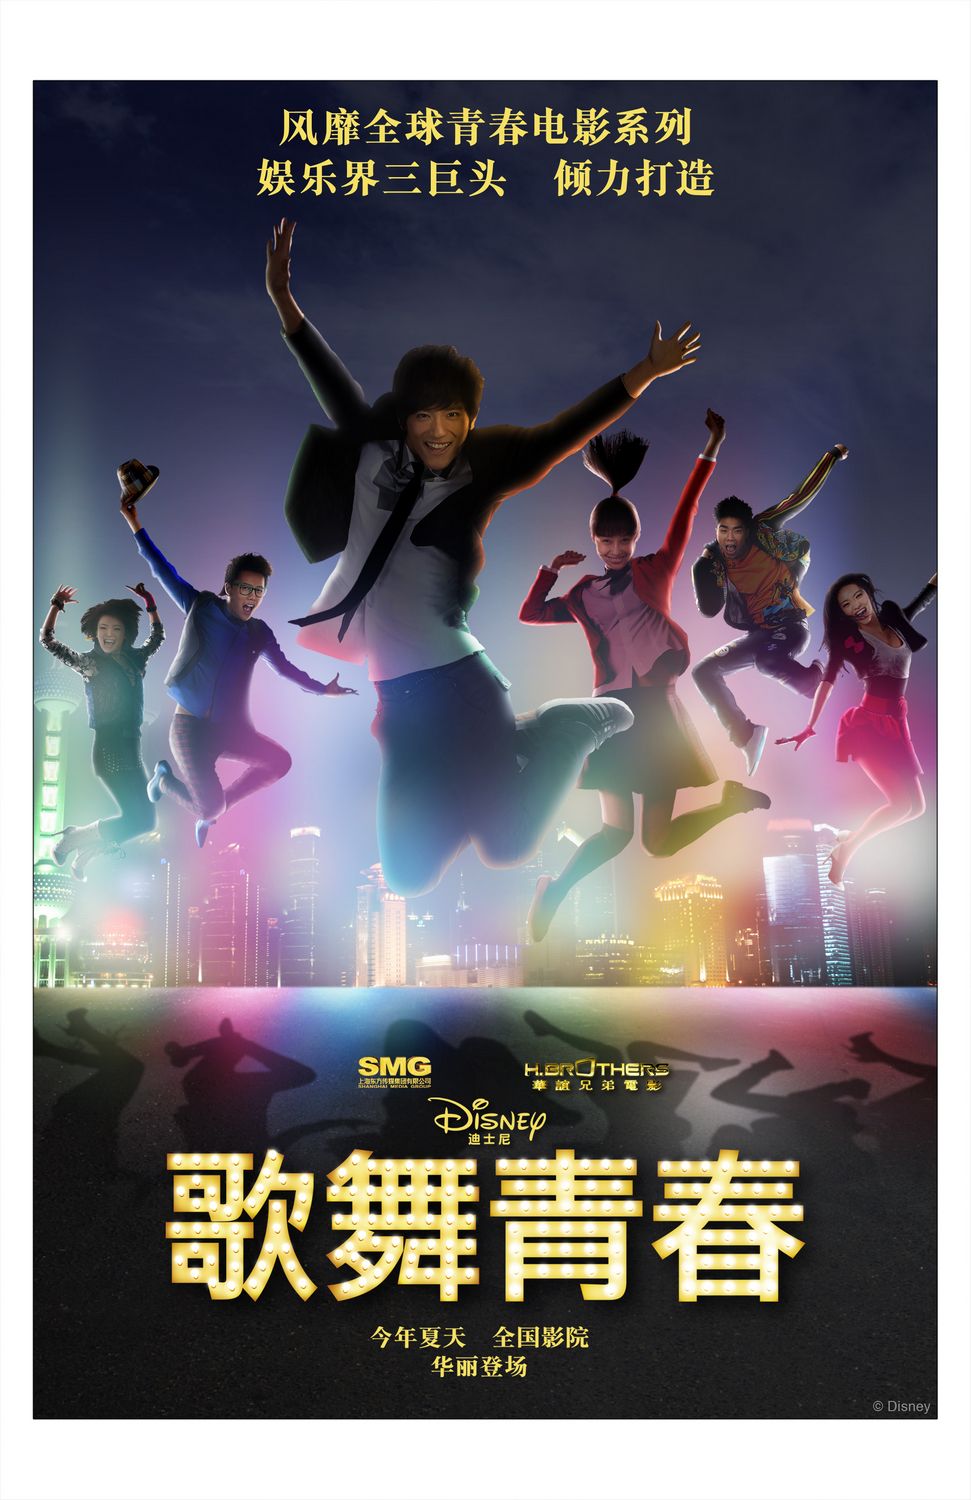 Extra Large Movie Poster Image for Disney High School Musical: China (#2 of 3)